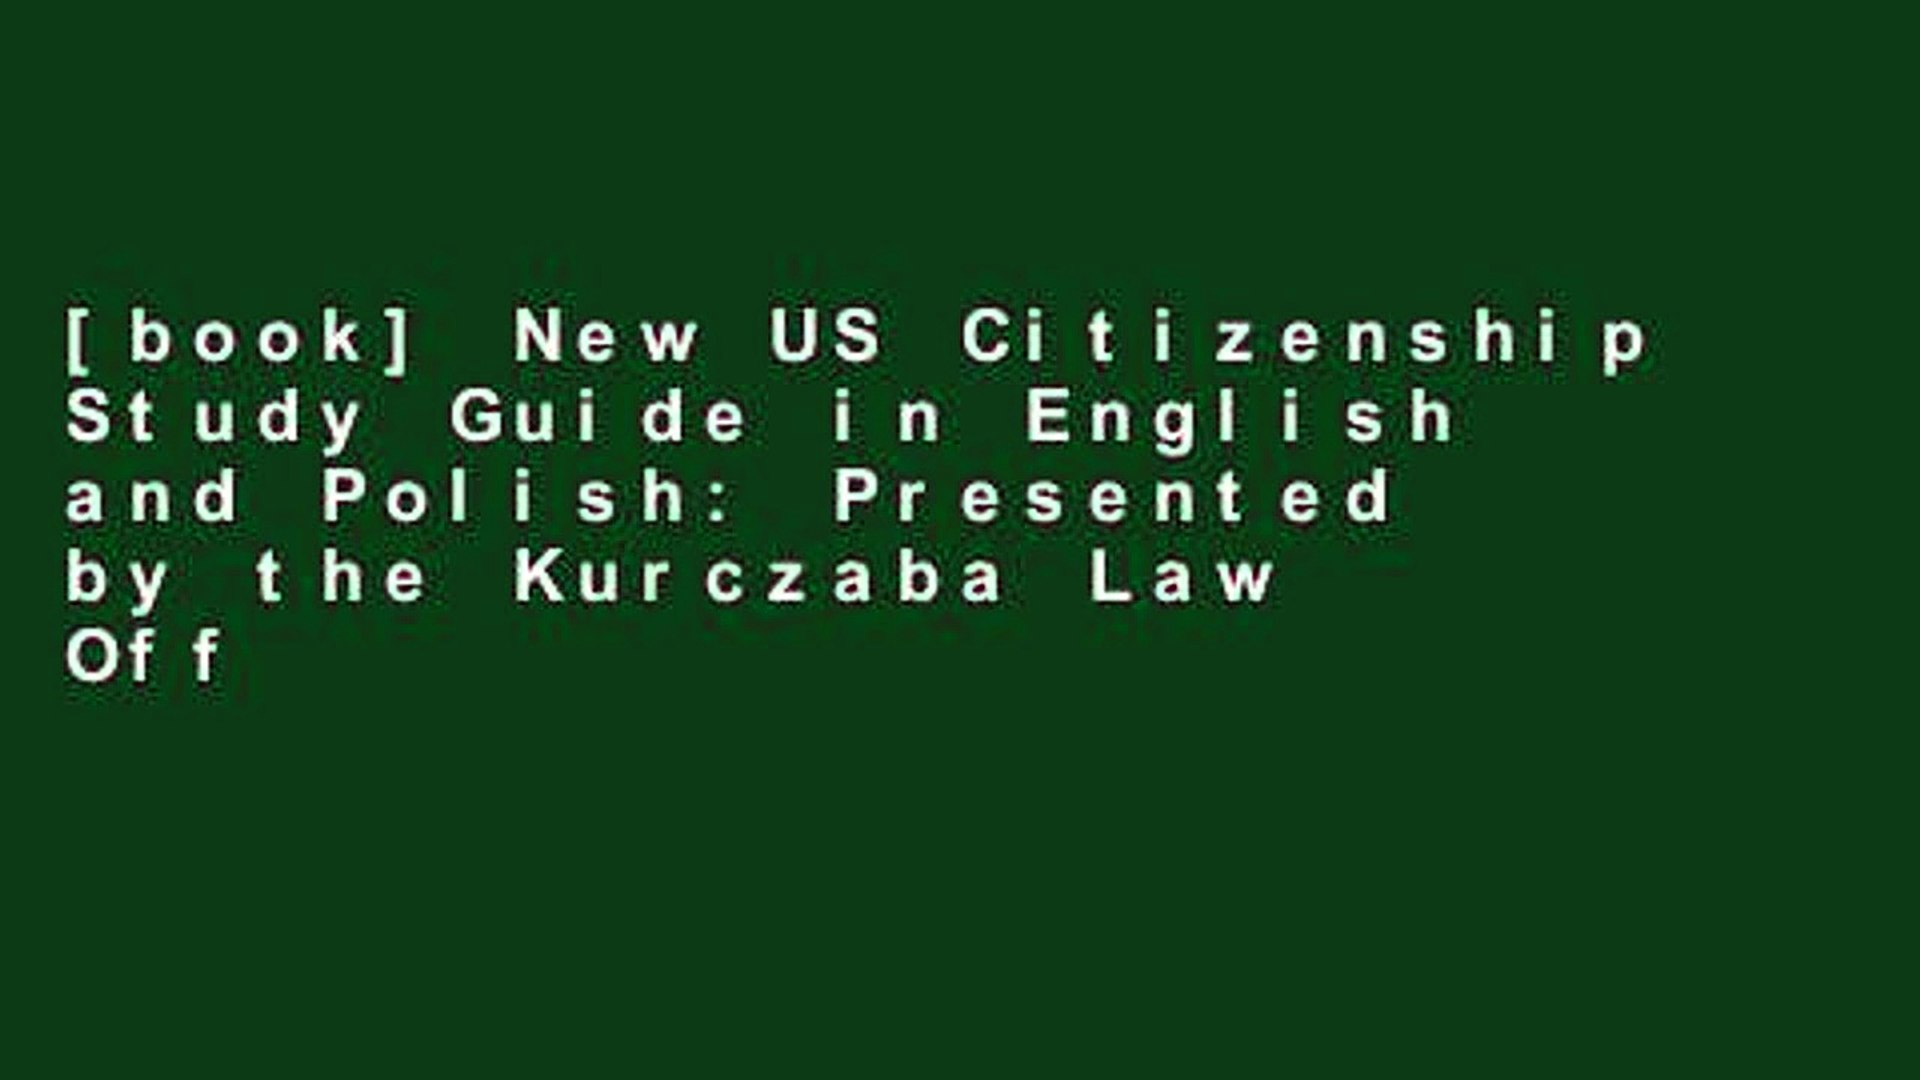 [book] New US Citizenship Study Guide in English and Polish: Presented by the Kurczaba Law Offices